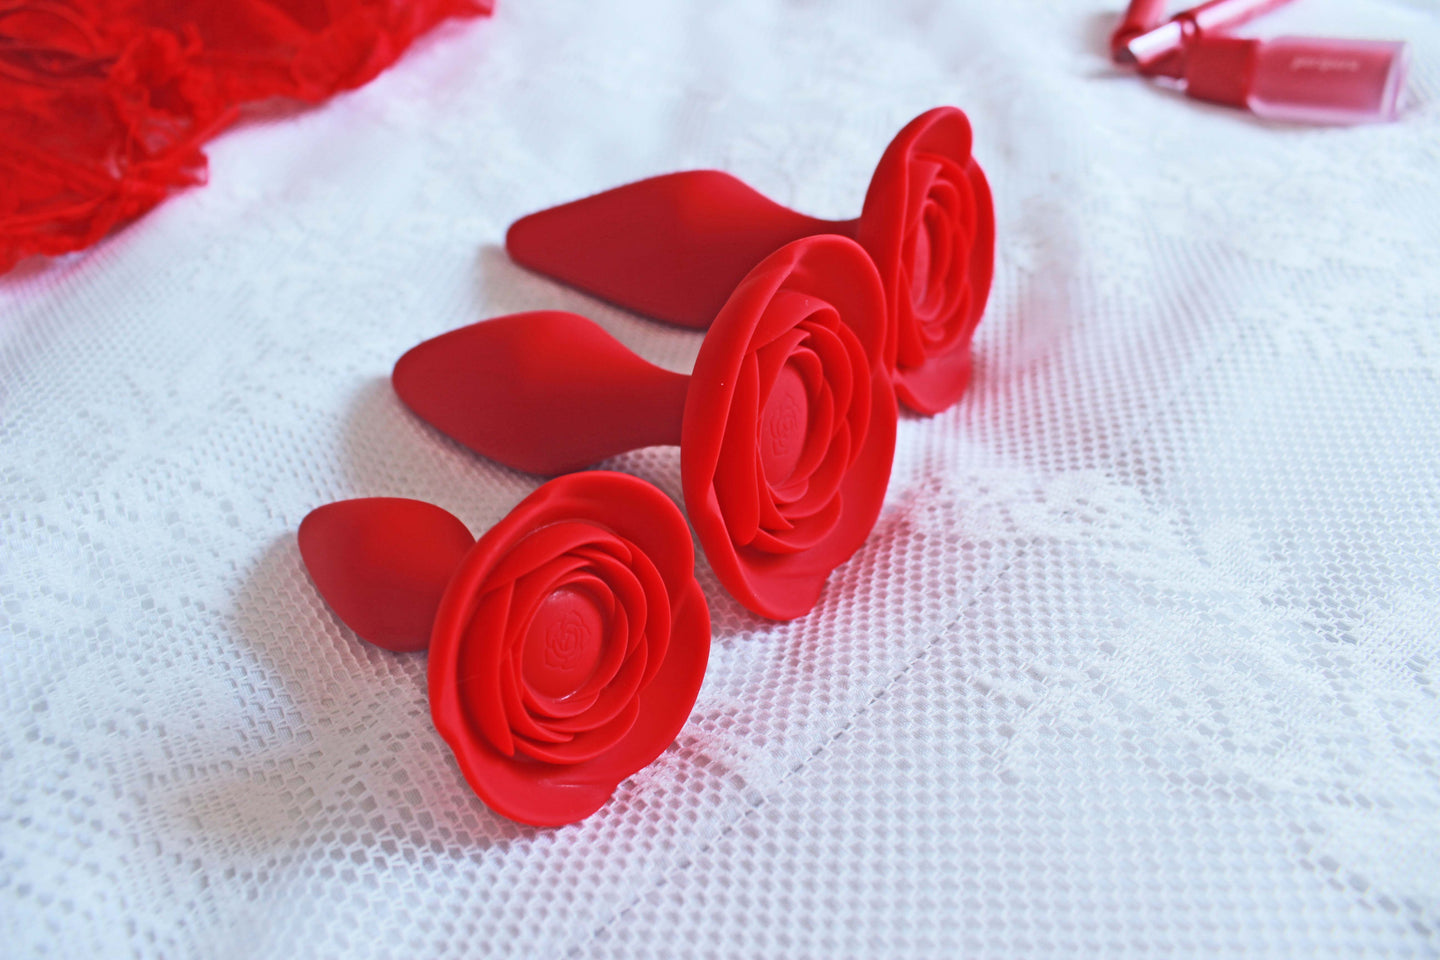 Small red rose butt plug laid in front of medium and large sizes of the same butt plug on white background with indistinguishable red objects in background